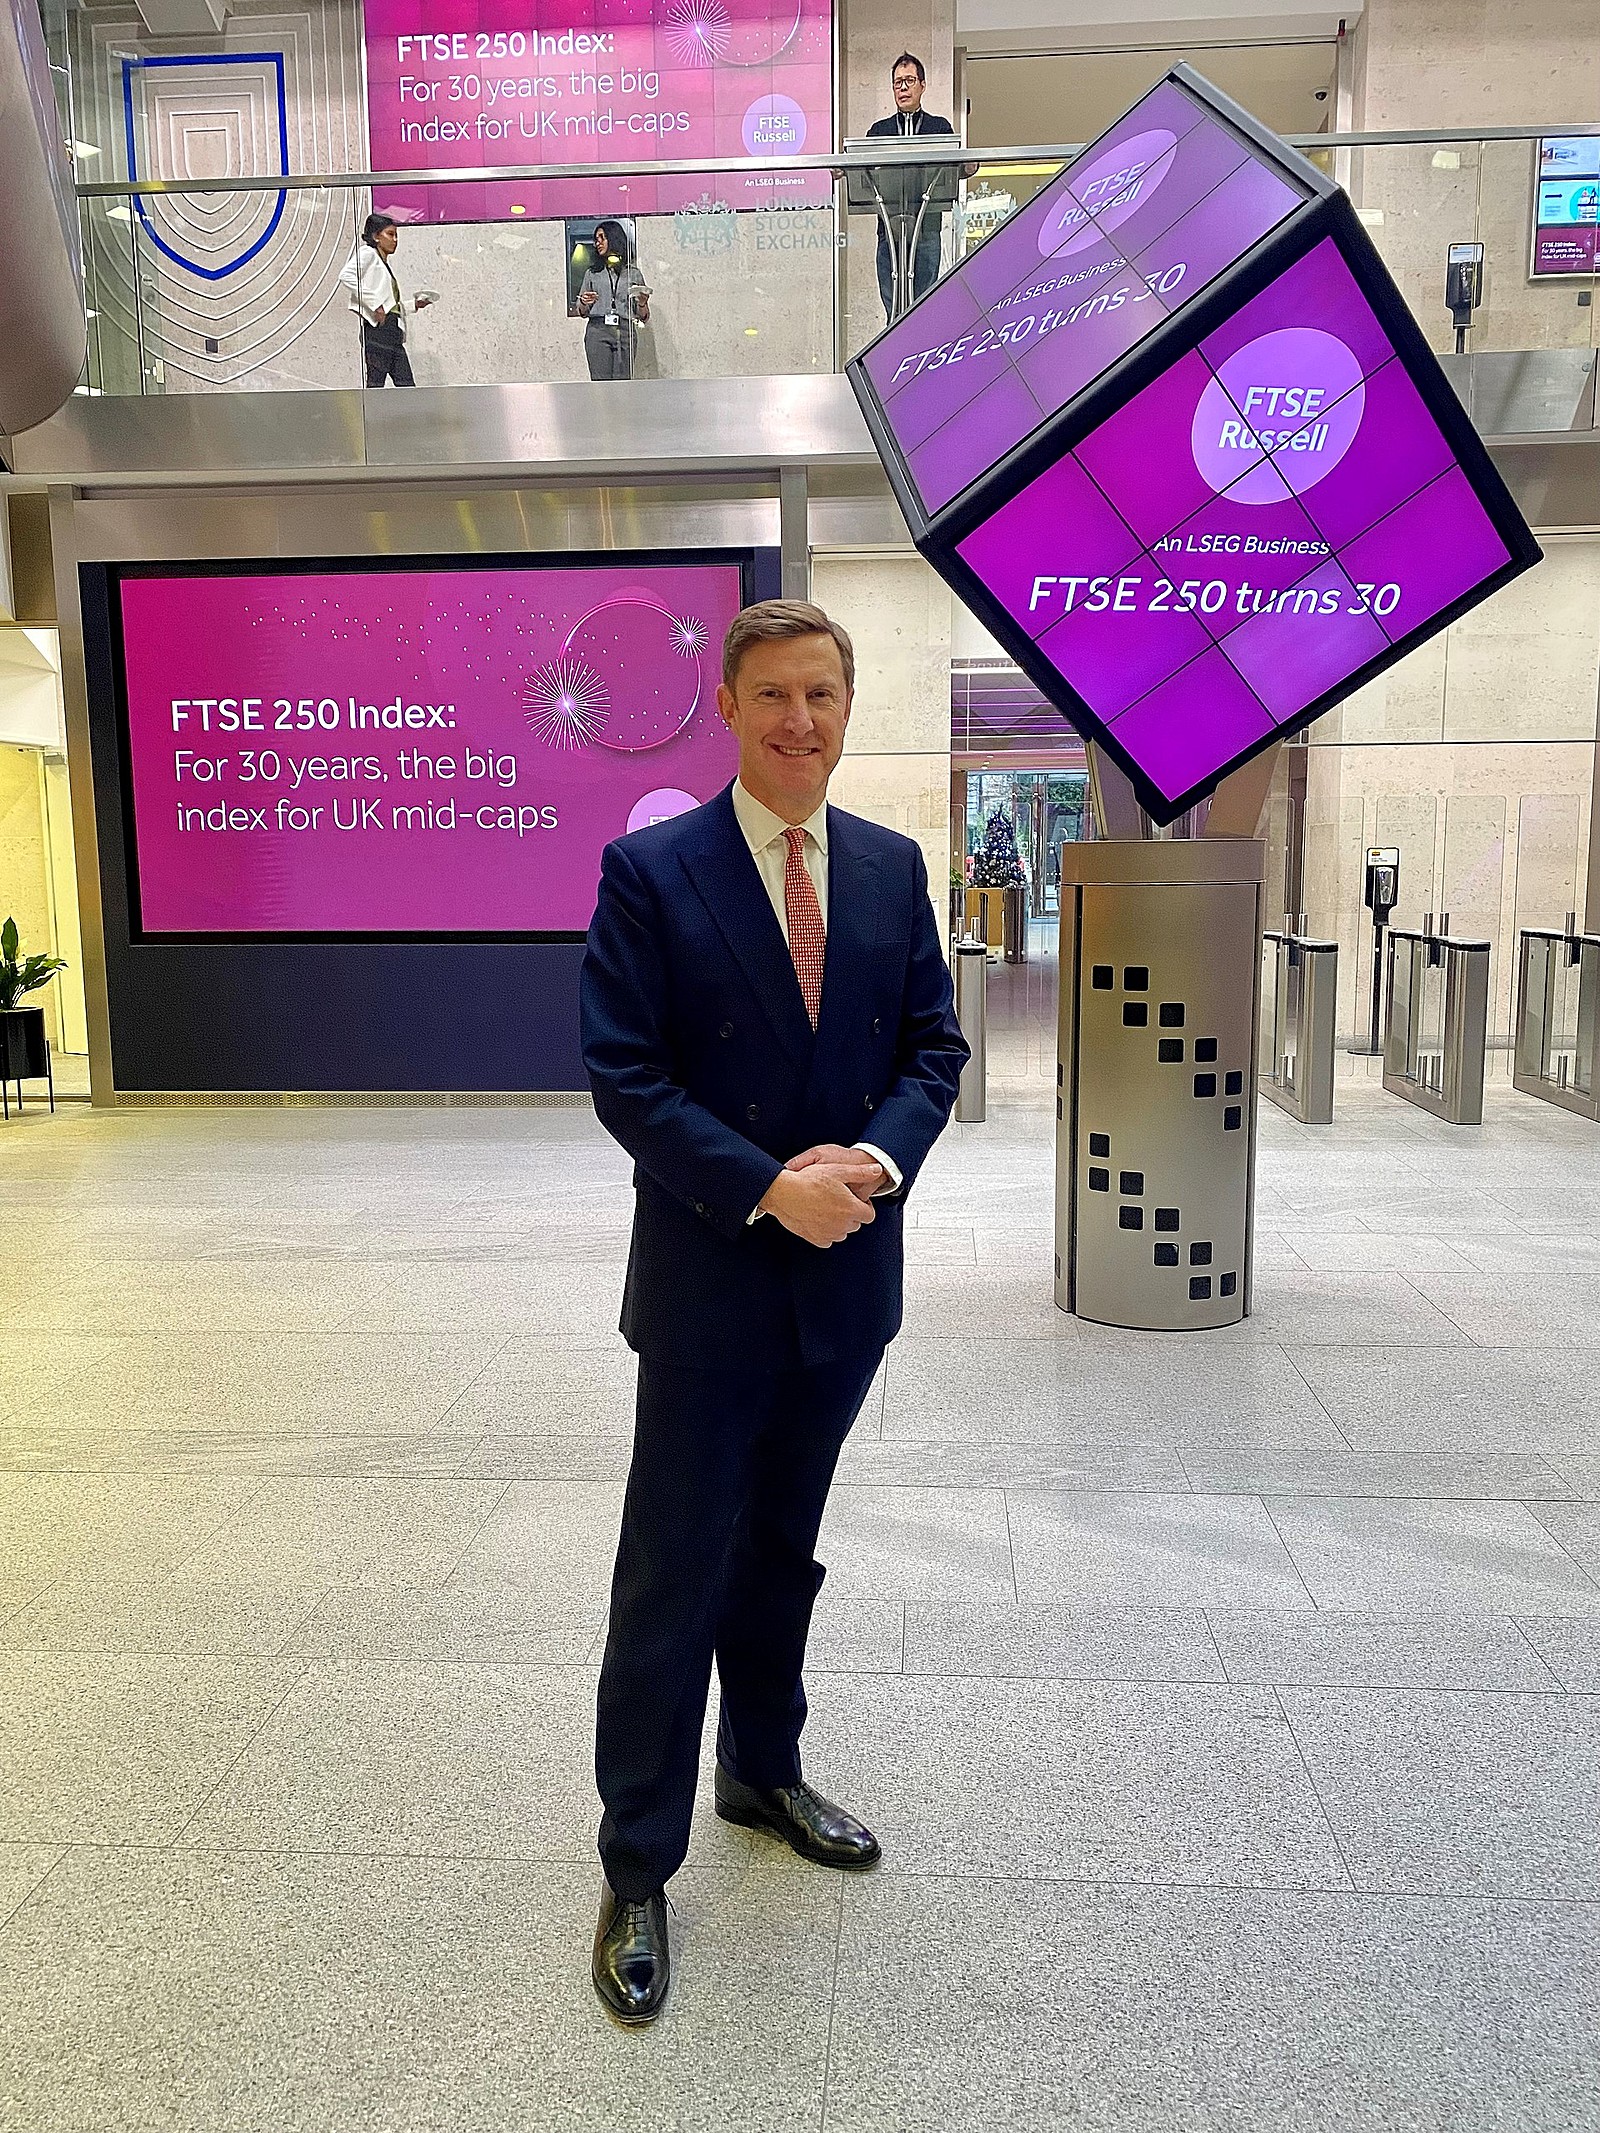 Robert Hughes-Penney represent Rathbones Group Plc for the opening ceremony at the London Stock Exchange to celebrate the 30th anniversary of the #FTSE250 Index